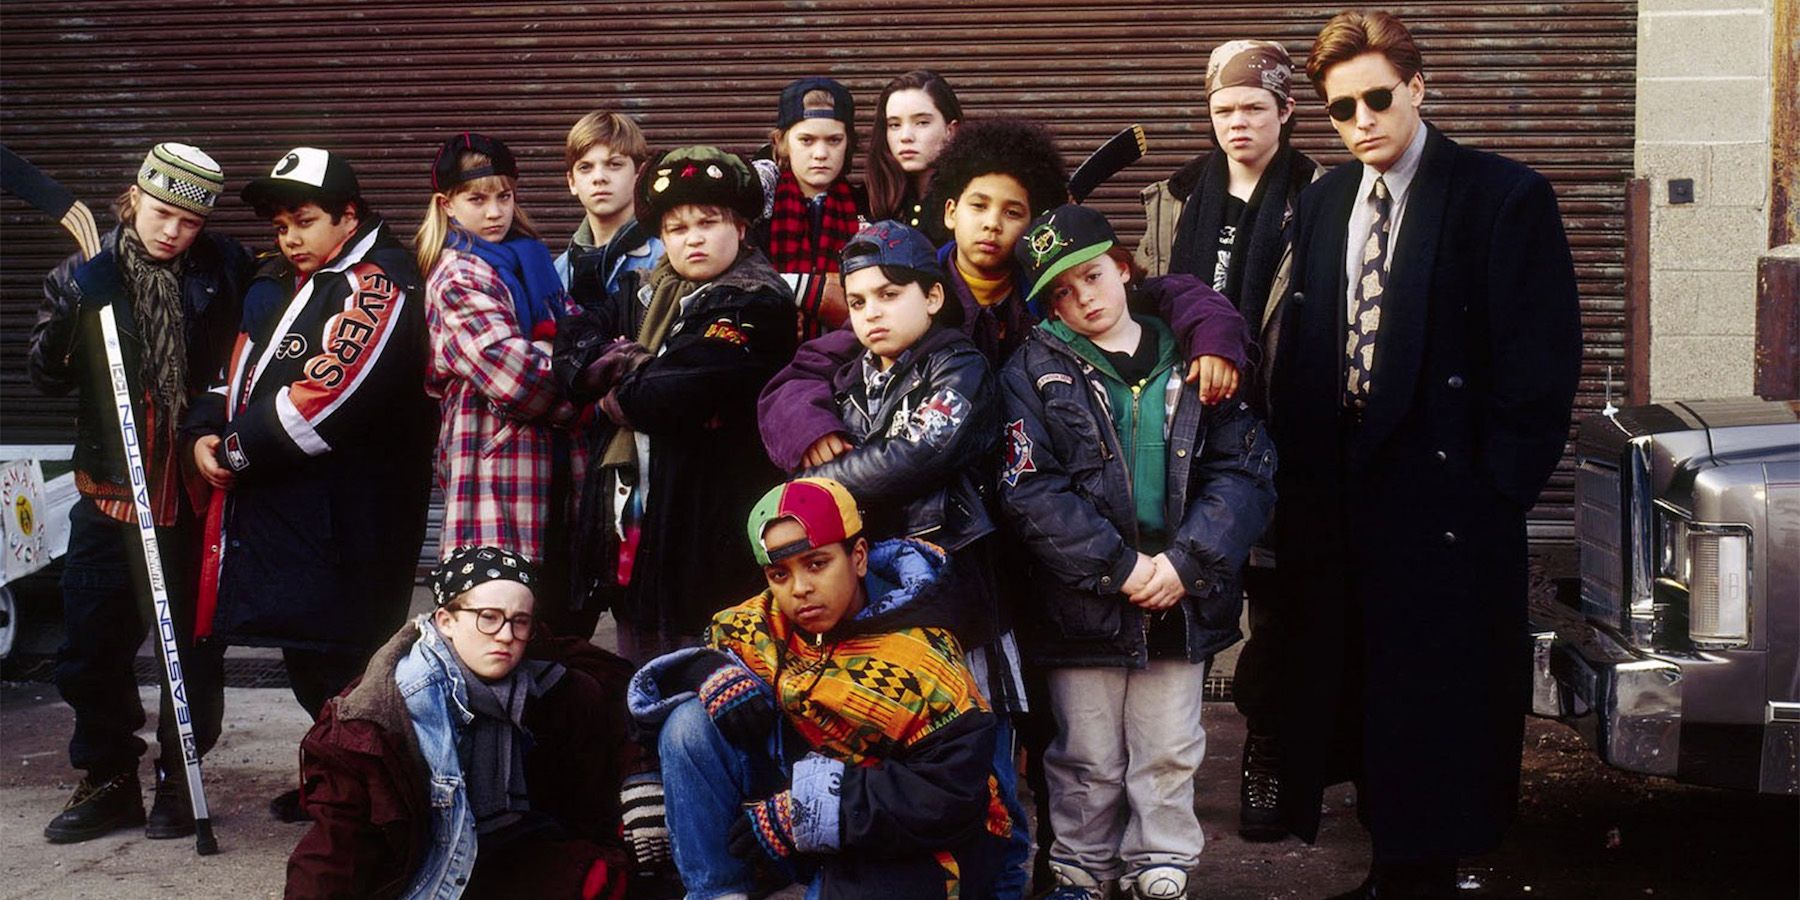 Bombay poses with his original Mighty Ducks team in an alley against a brick wall